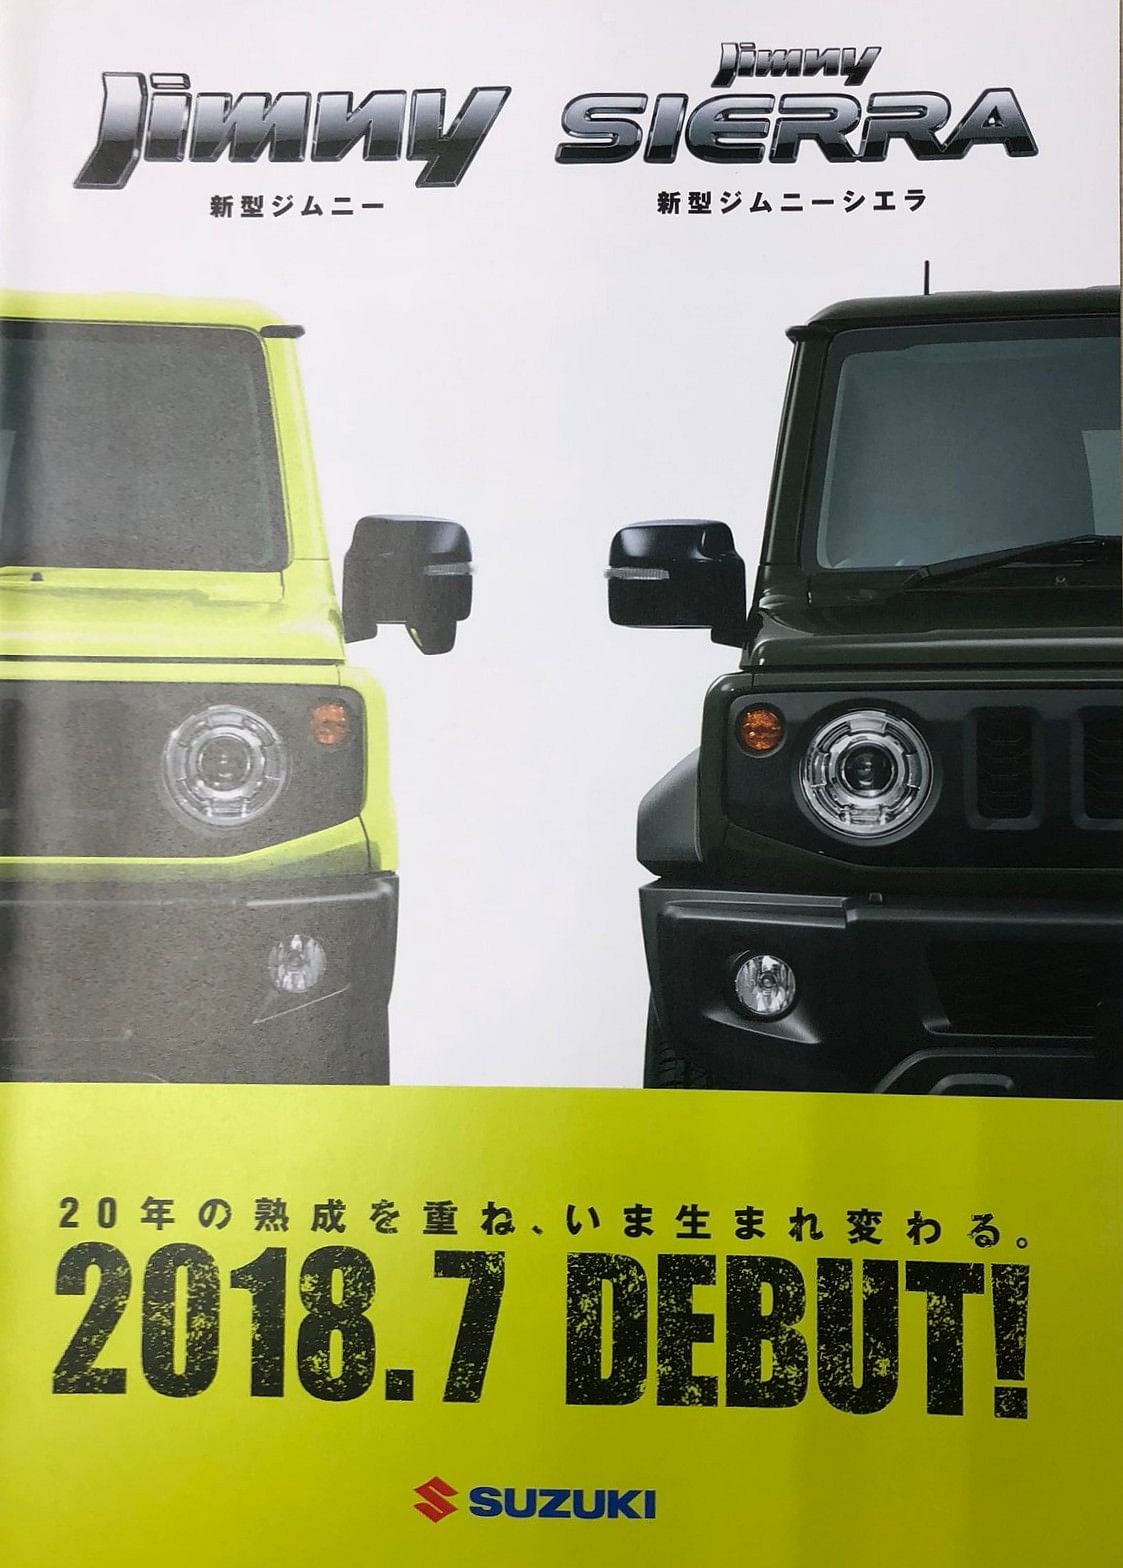 The Jimny will be launched in two variants –– the standard Jimny and the more capable Jimny Sierra.